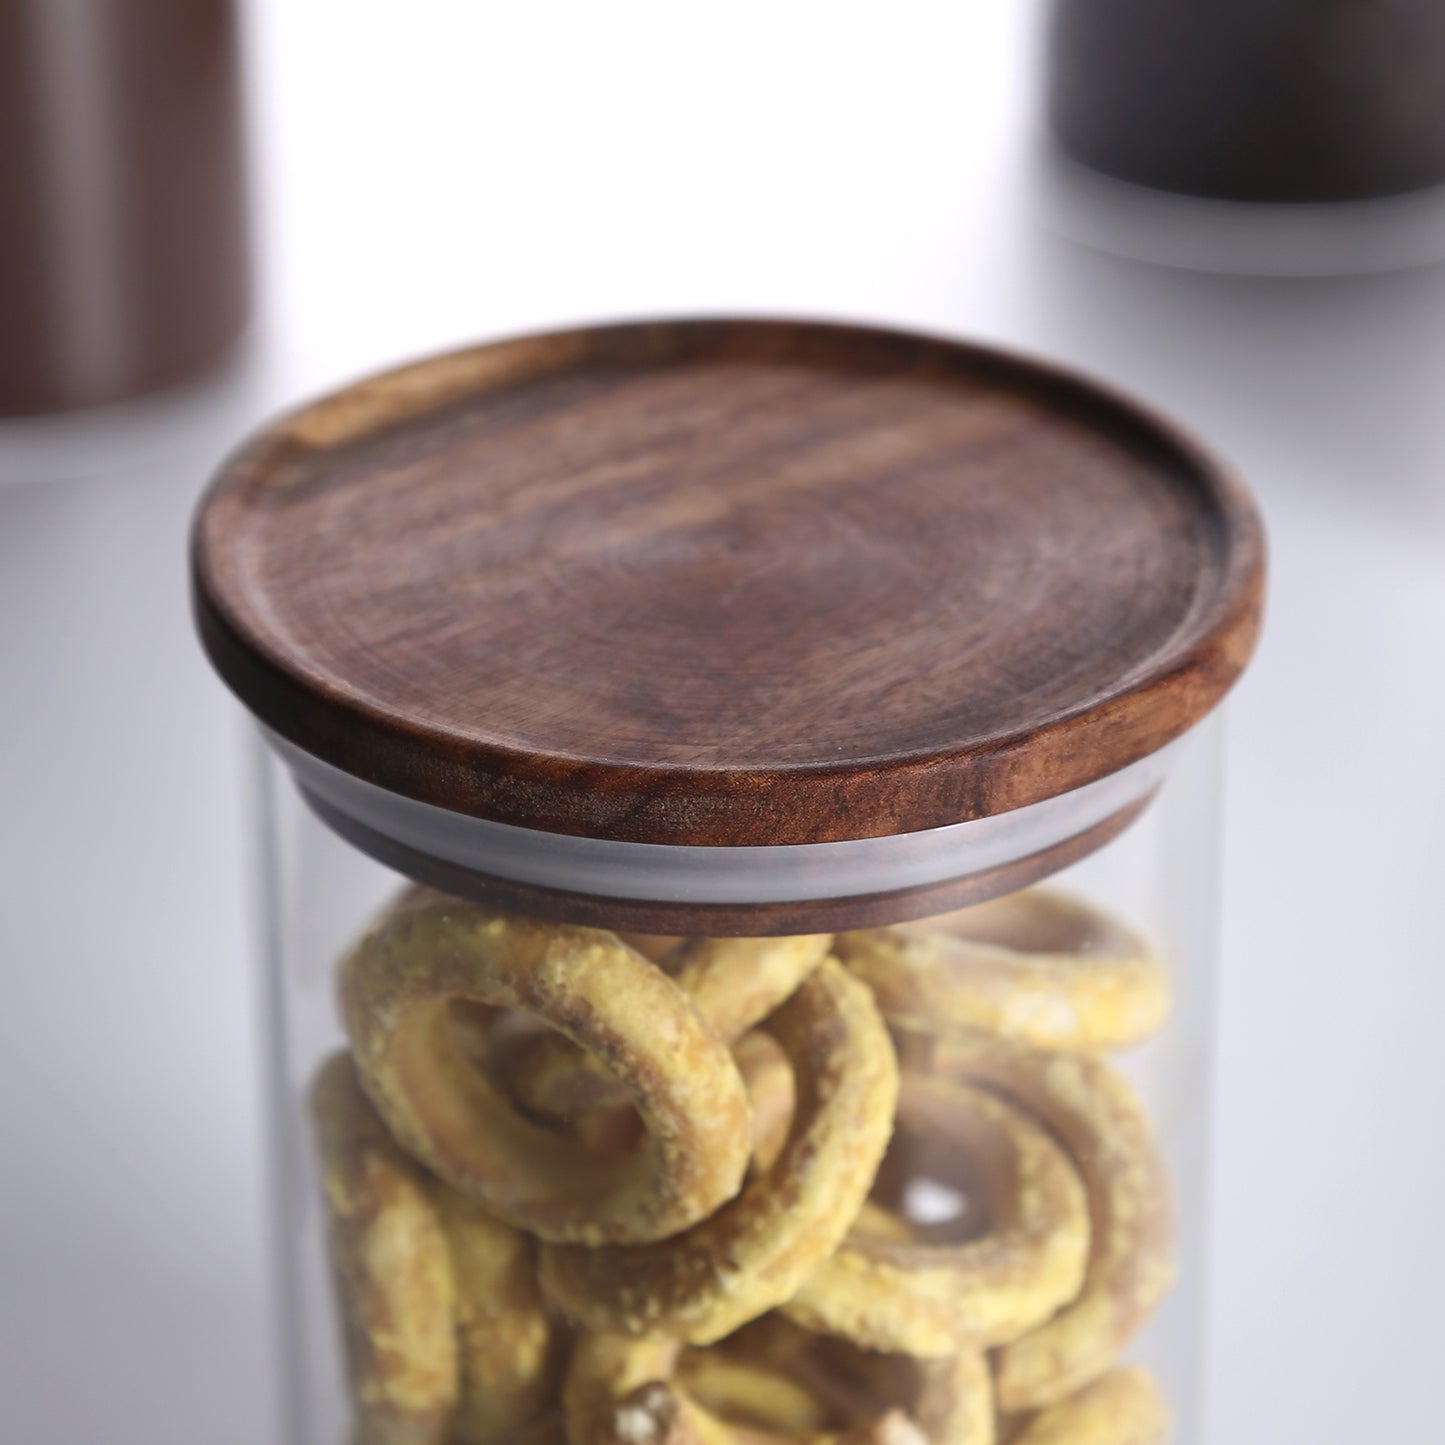 KKC Glass Airtight Food Storage Jar Containers with Wooden Lids, 25 FLoz (750 ML)